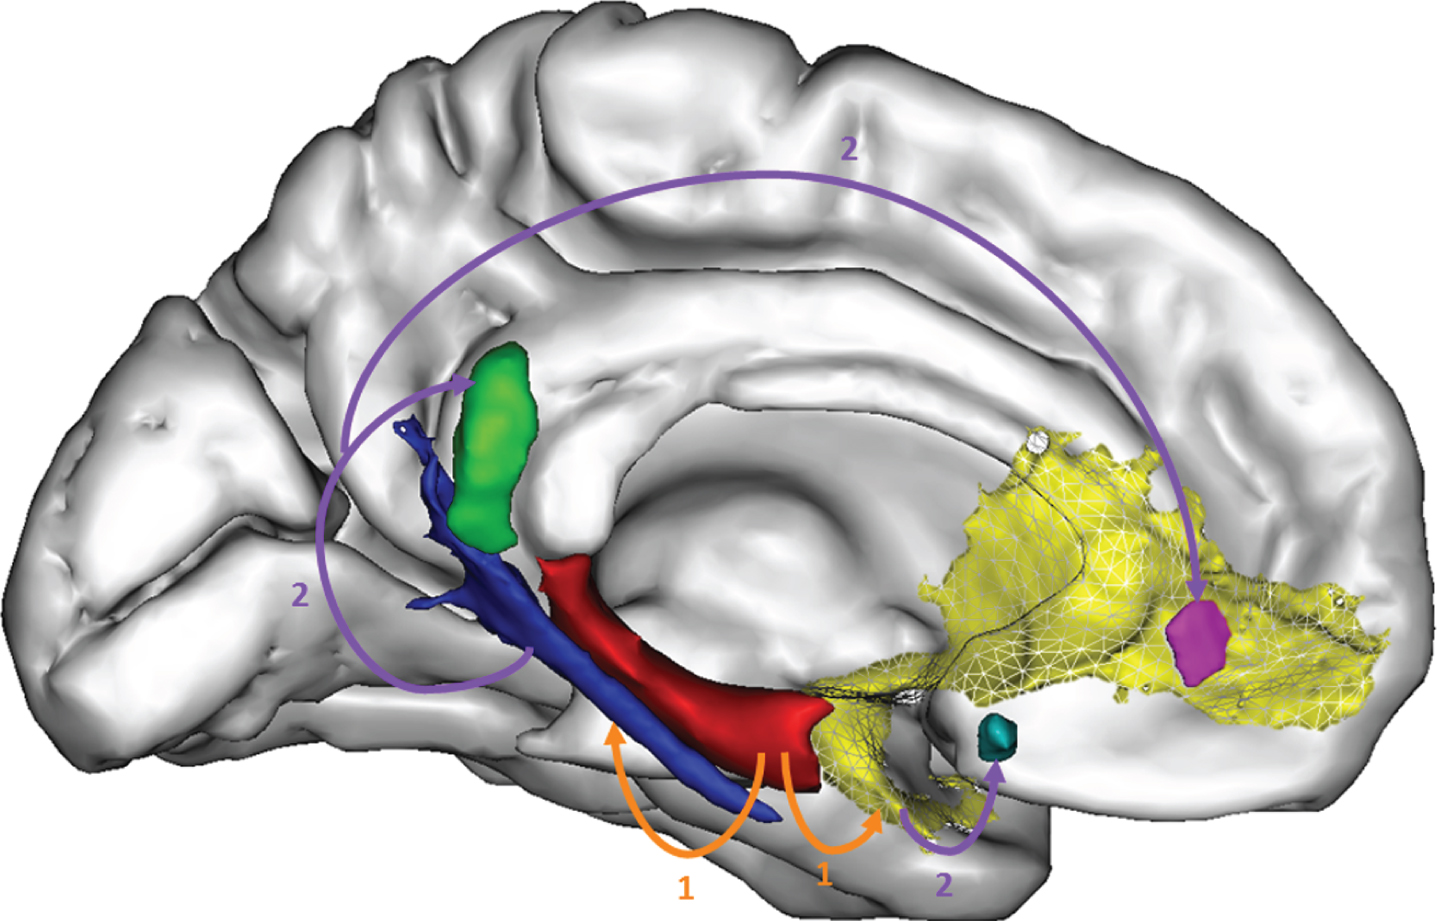 Distant relationships between atrophy and hypometabolism in AD. Using original methods especially developed for this purpose, we showed that hippocampal atrophy (red) was at least partly responsible for the disruption of white matter fibers (the perforant path in blue and the uncinate fasciculus in yellow) (1) itself responsible for hypometabolism in the posterior cingulate (green) and medial orbitofrontal cortex (purple and light blue) (2). From [42].